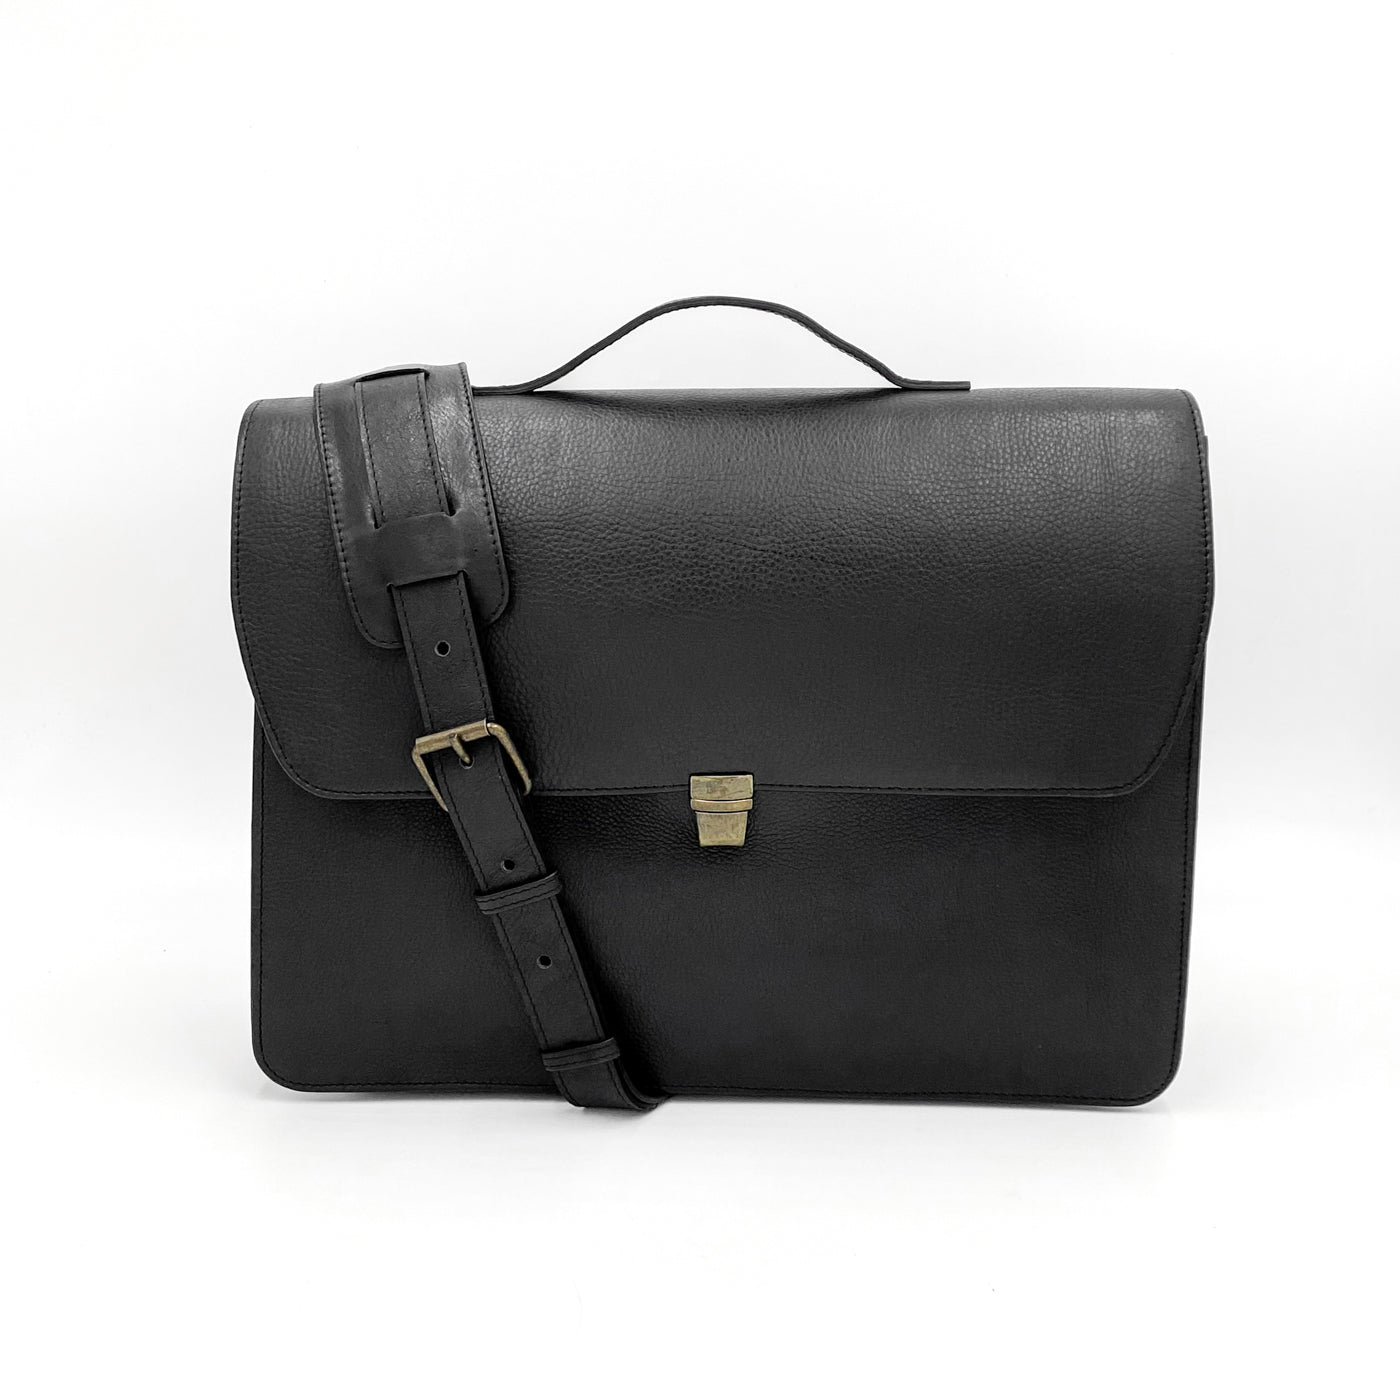 Classic Luxury Designer Grey Messenger Bag For Men And Women Black Cross  Body Handbag With Zipp Pocket, Messenger And Phone Purse Ideal For Work,  Outdoor And Leisure From Jn8899, $18.77 | DHgate.Com